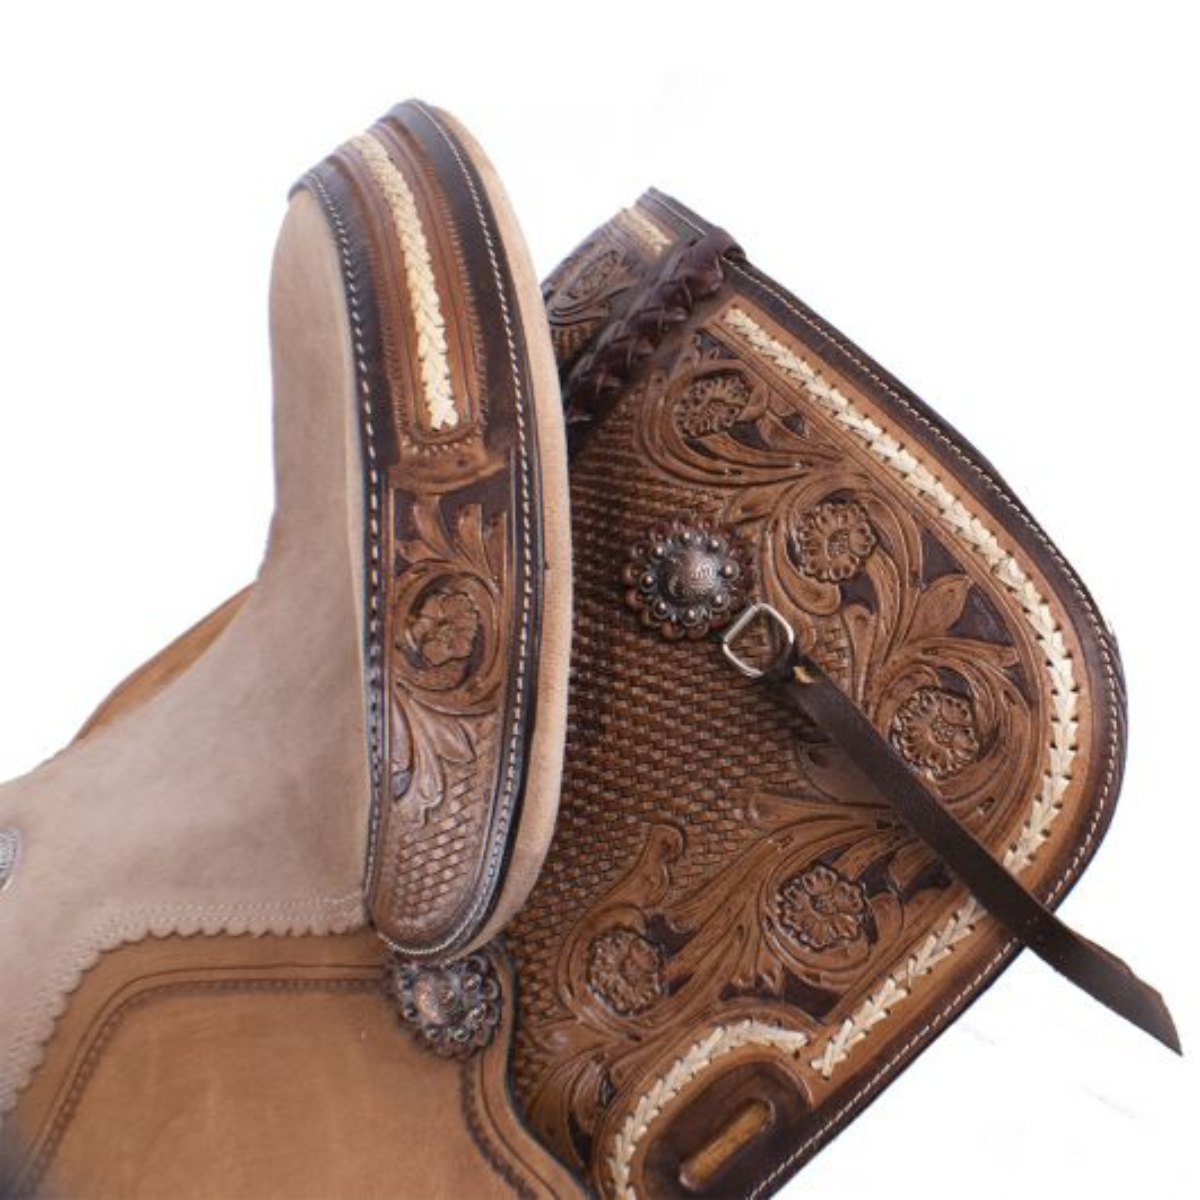 15" DOUBLE T BASKET WEAVE AND FLORAL TOOLED BARREL SADDLE - Double T Saddles